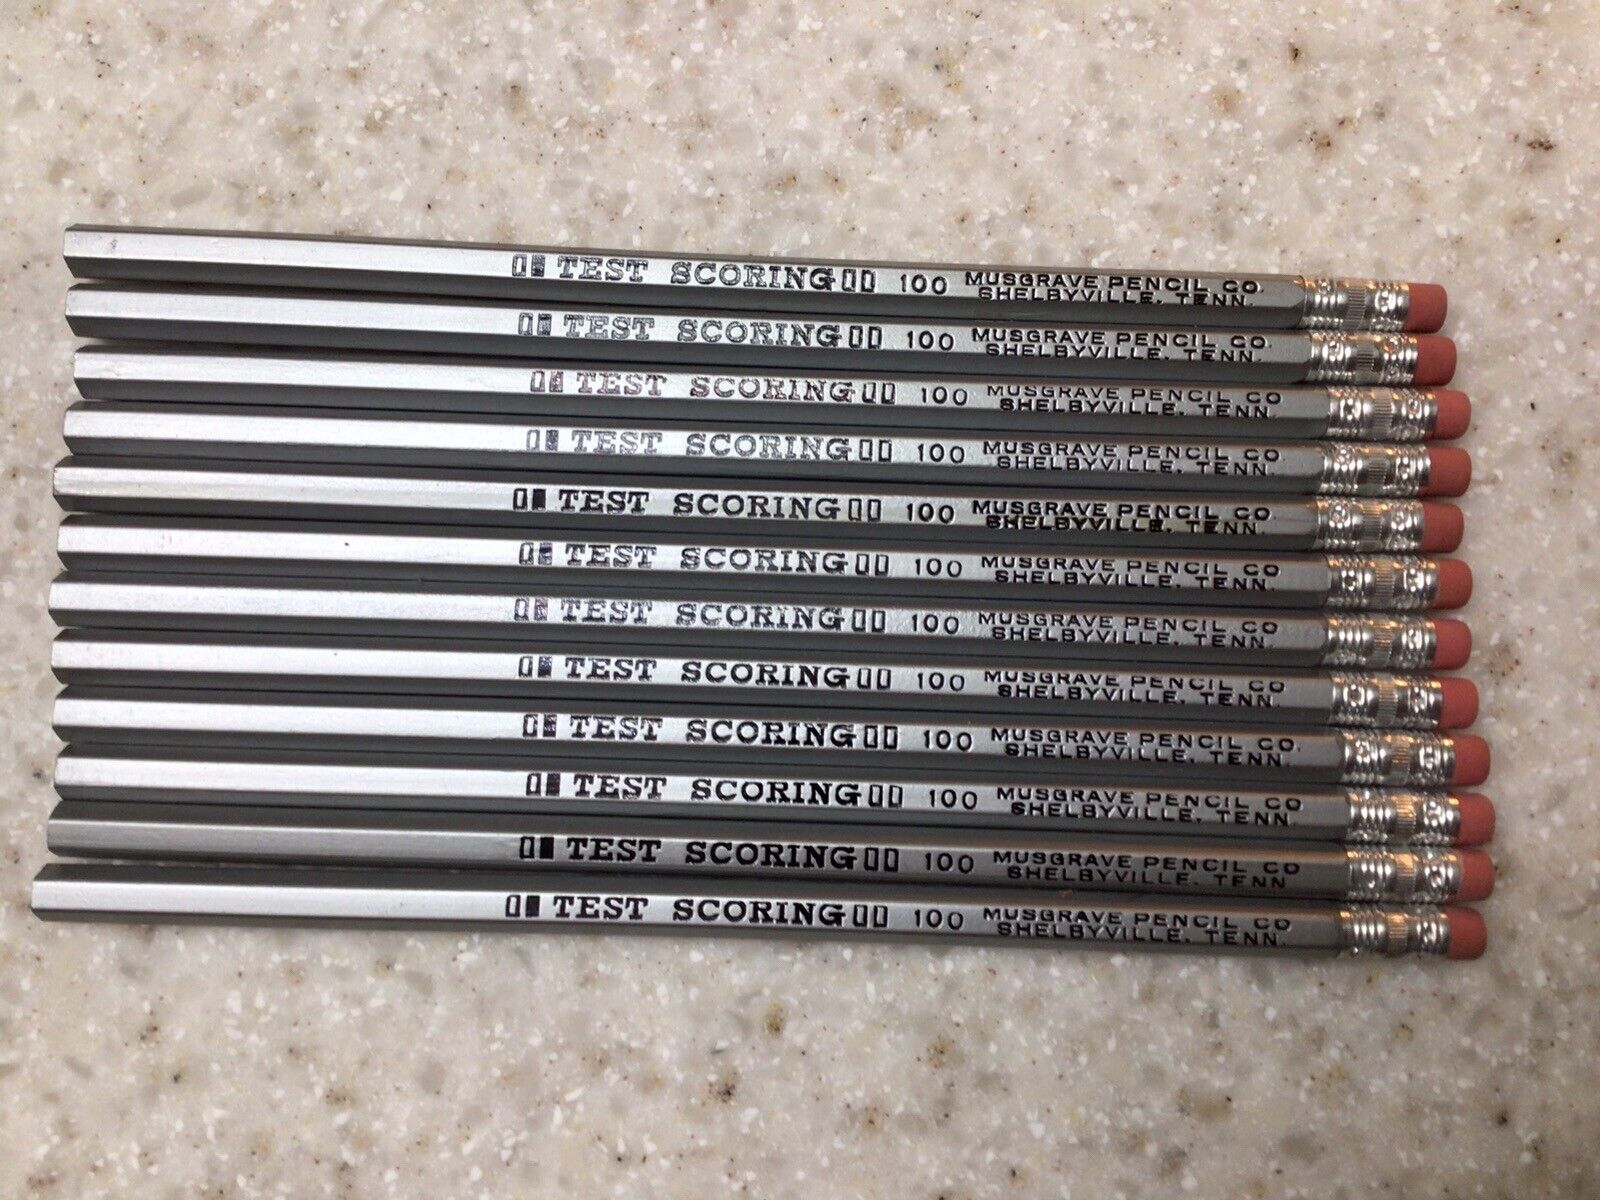 12 TEST SCORING #100 PENCILS W/ERASERS MUSGRAVE PENCIL CO. SHELBYVILLE, TN